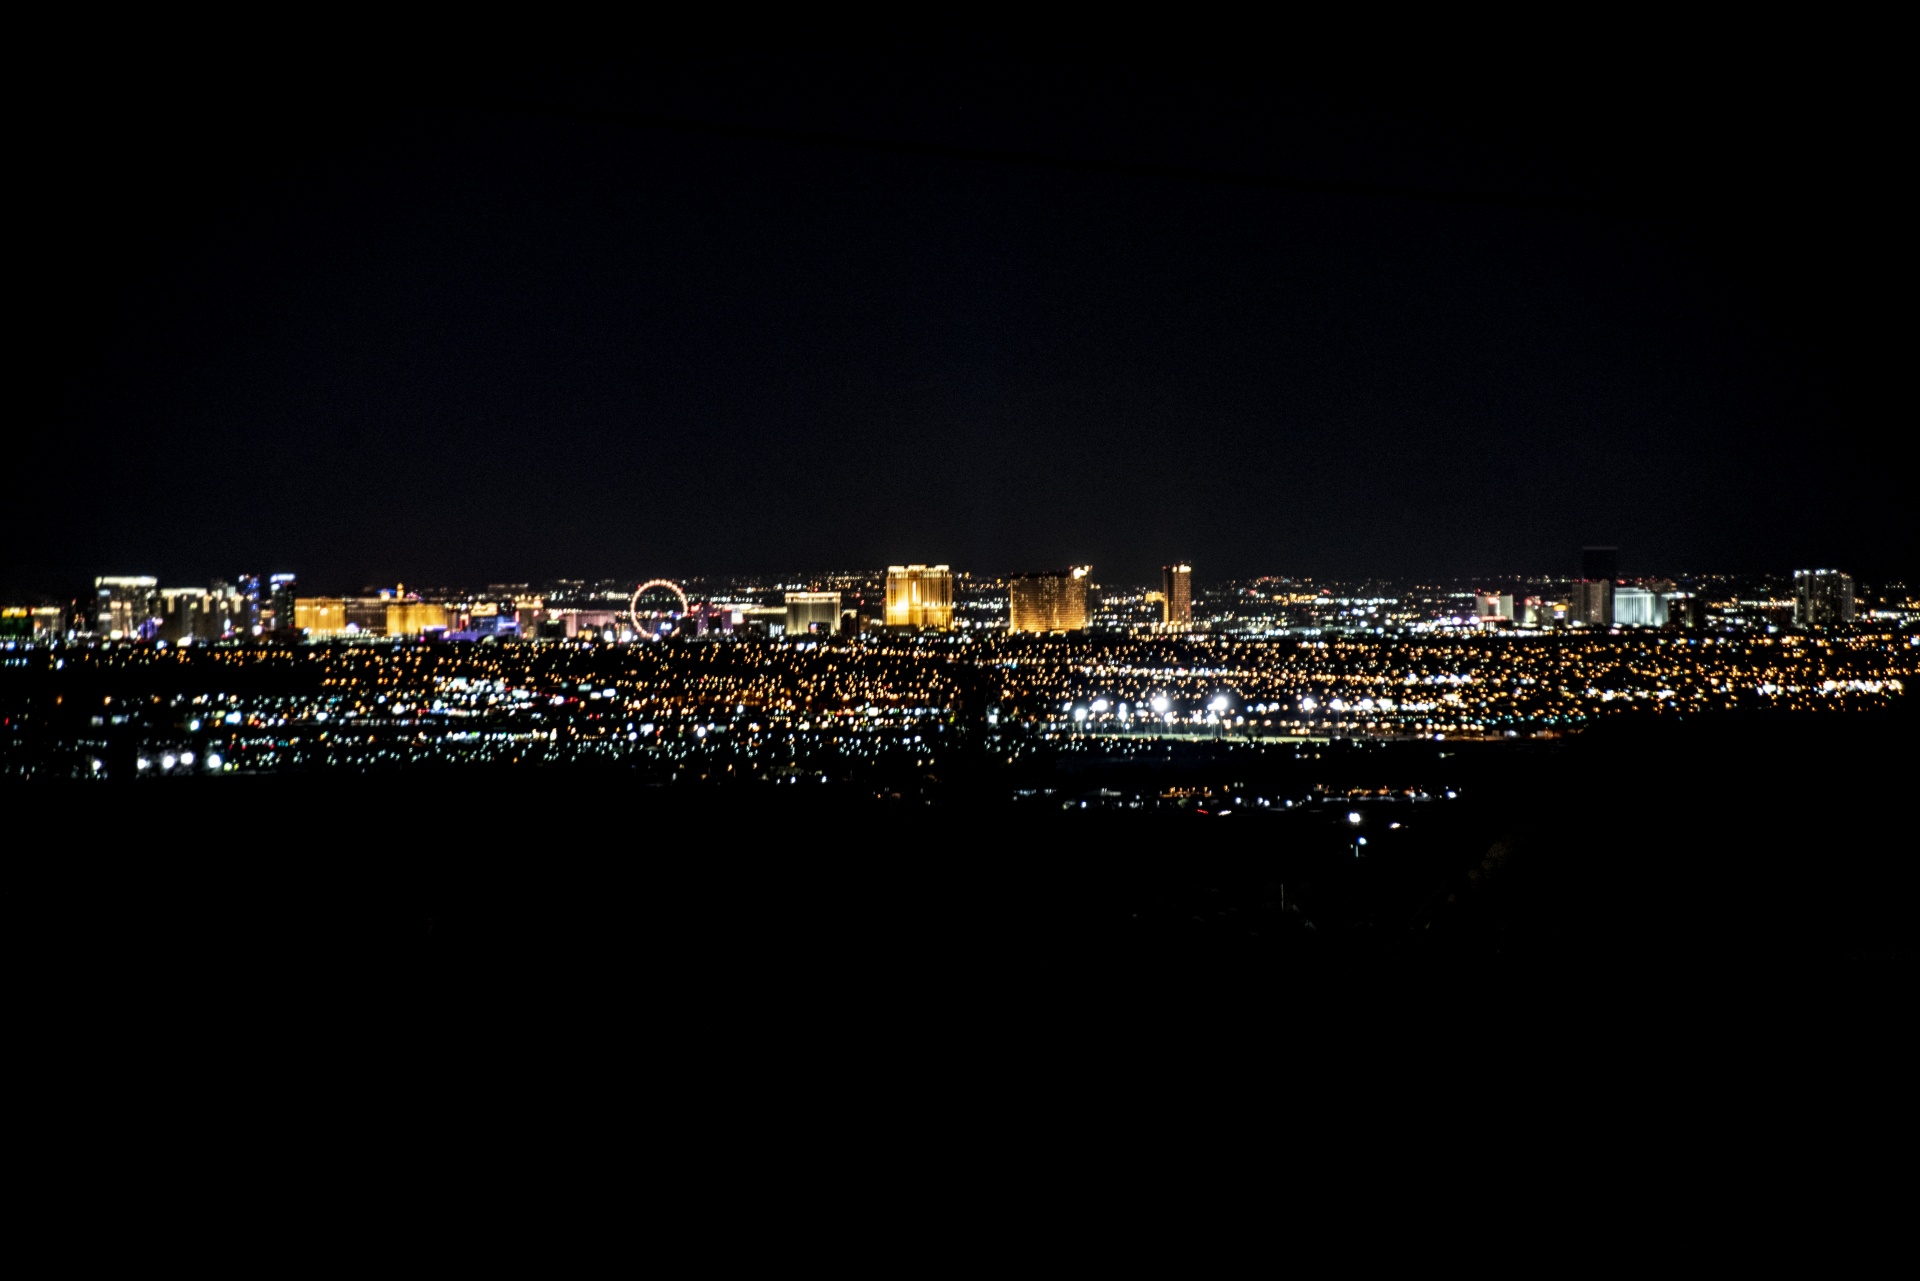 The Las Vegas Strip viewed at night from a few miles away